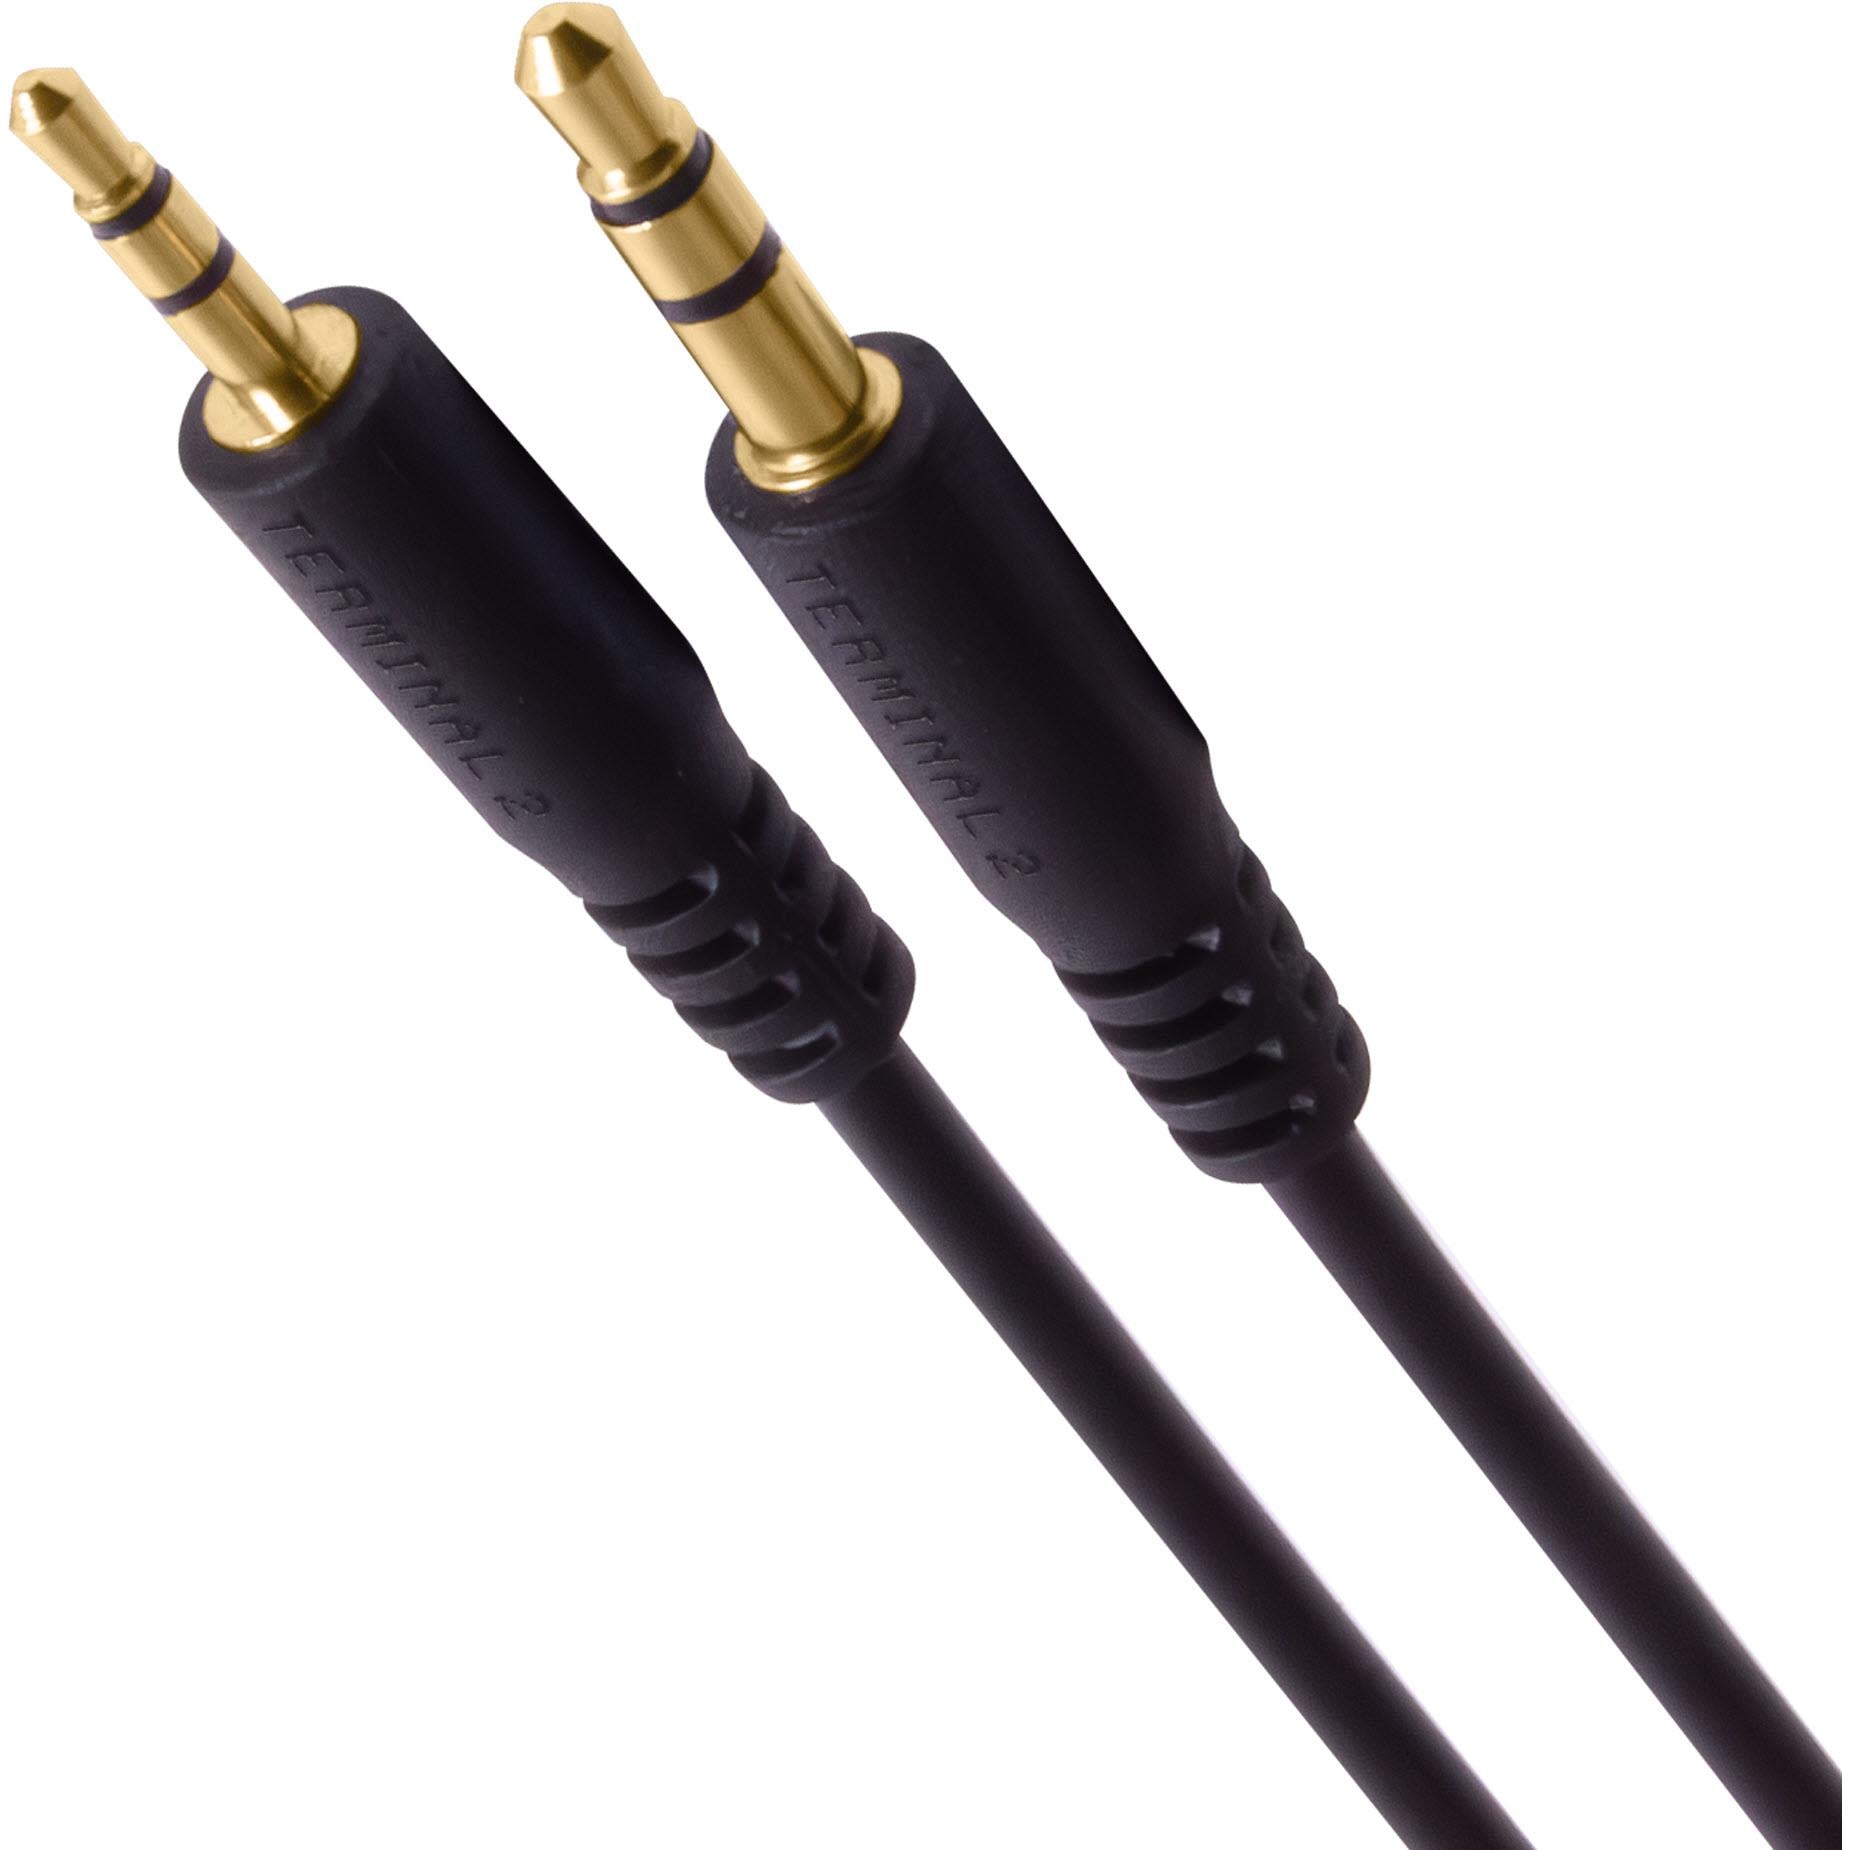 terminal 2 2.5mm to 3.5mm audio cable 1.2m (black)